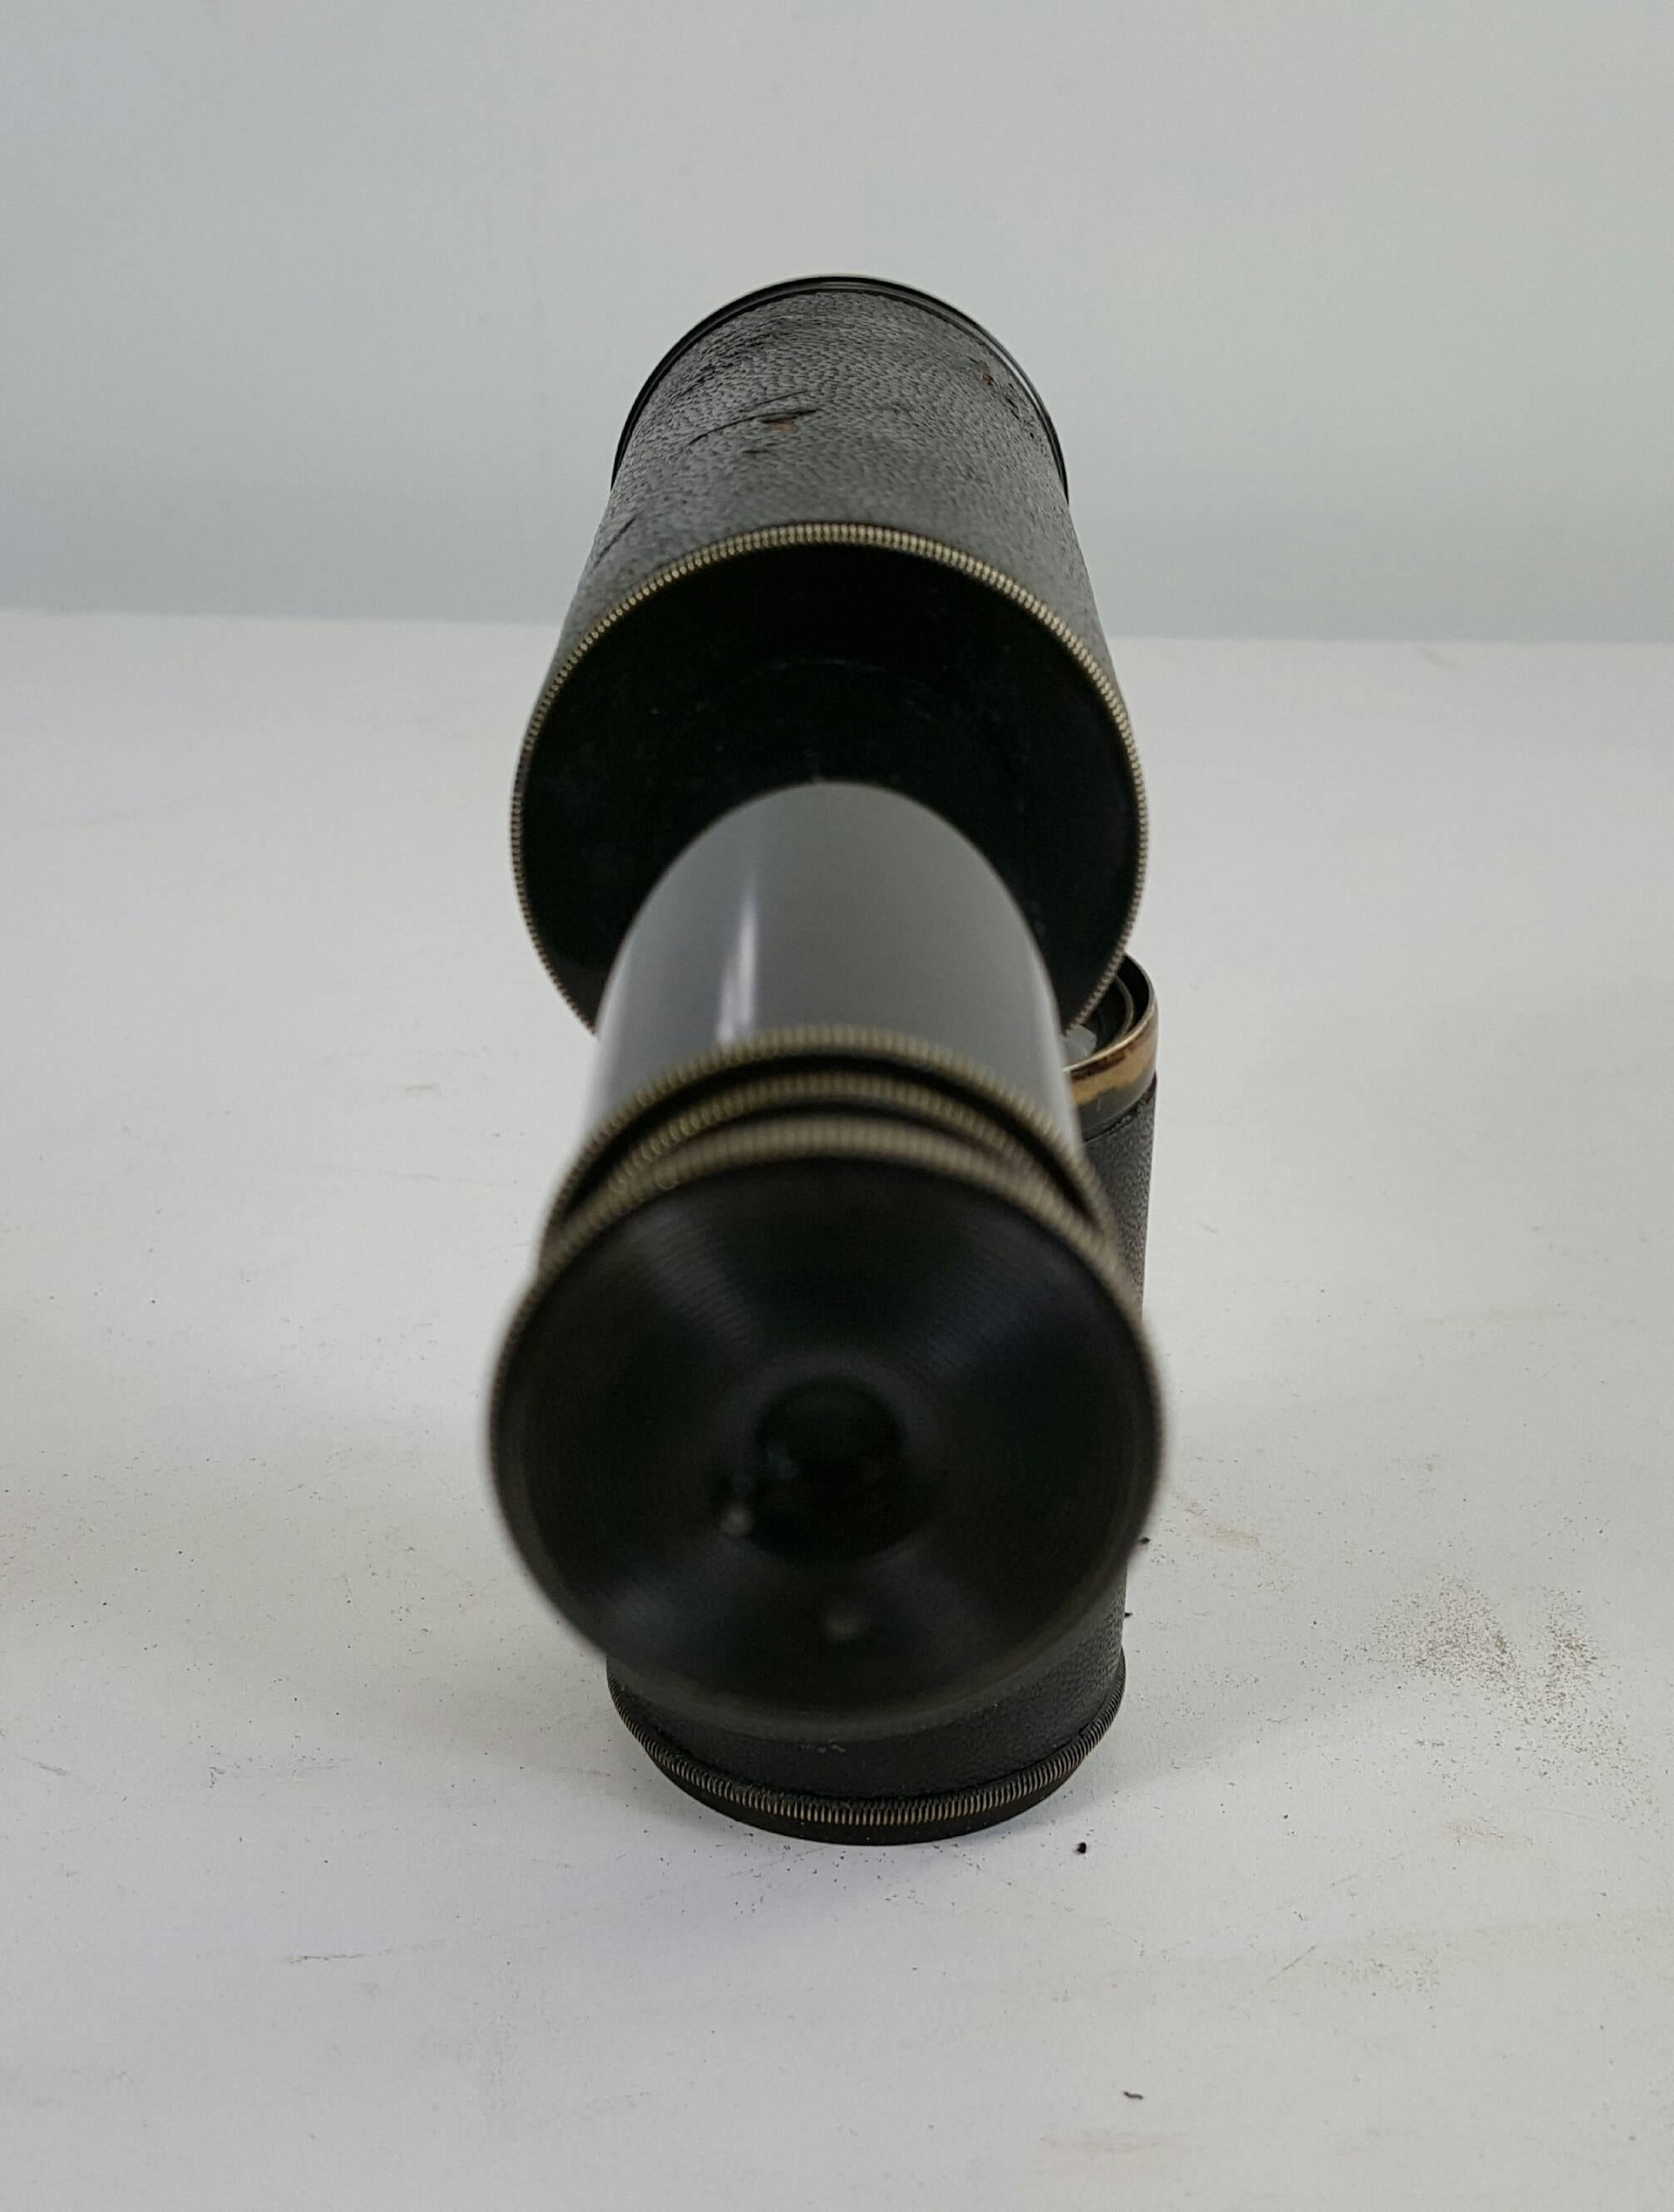 Antique leather wrapped telescope, made by E.Vion, Paris. Handsome little decorative object, nice original condition.